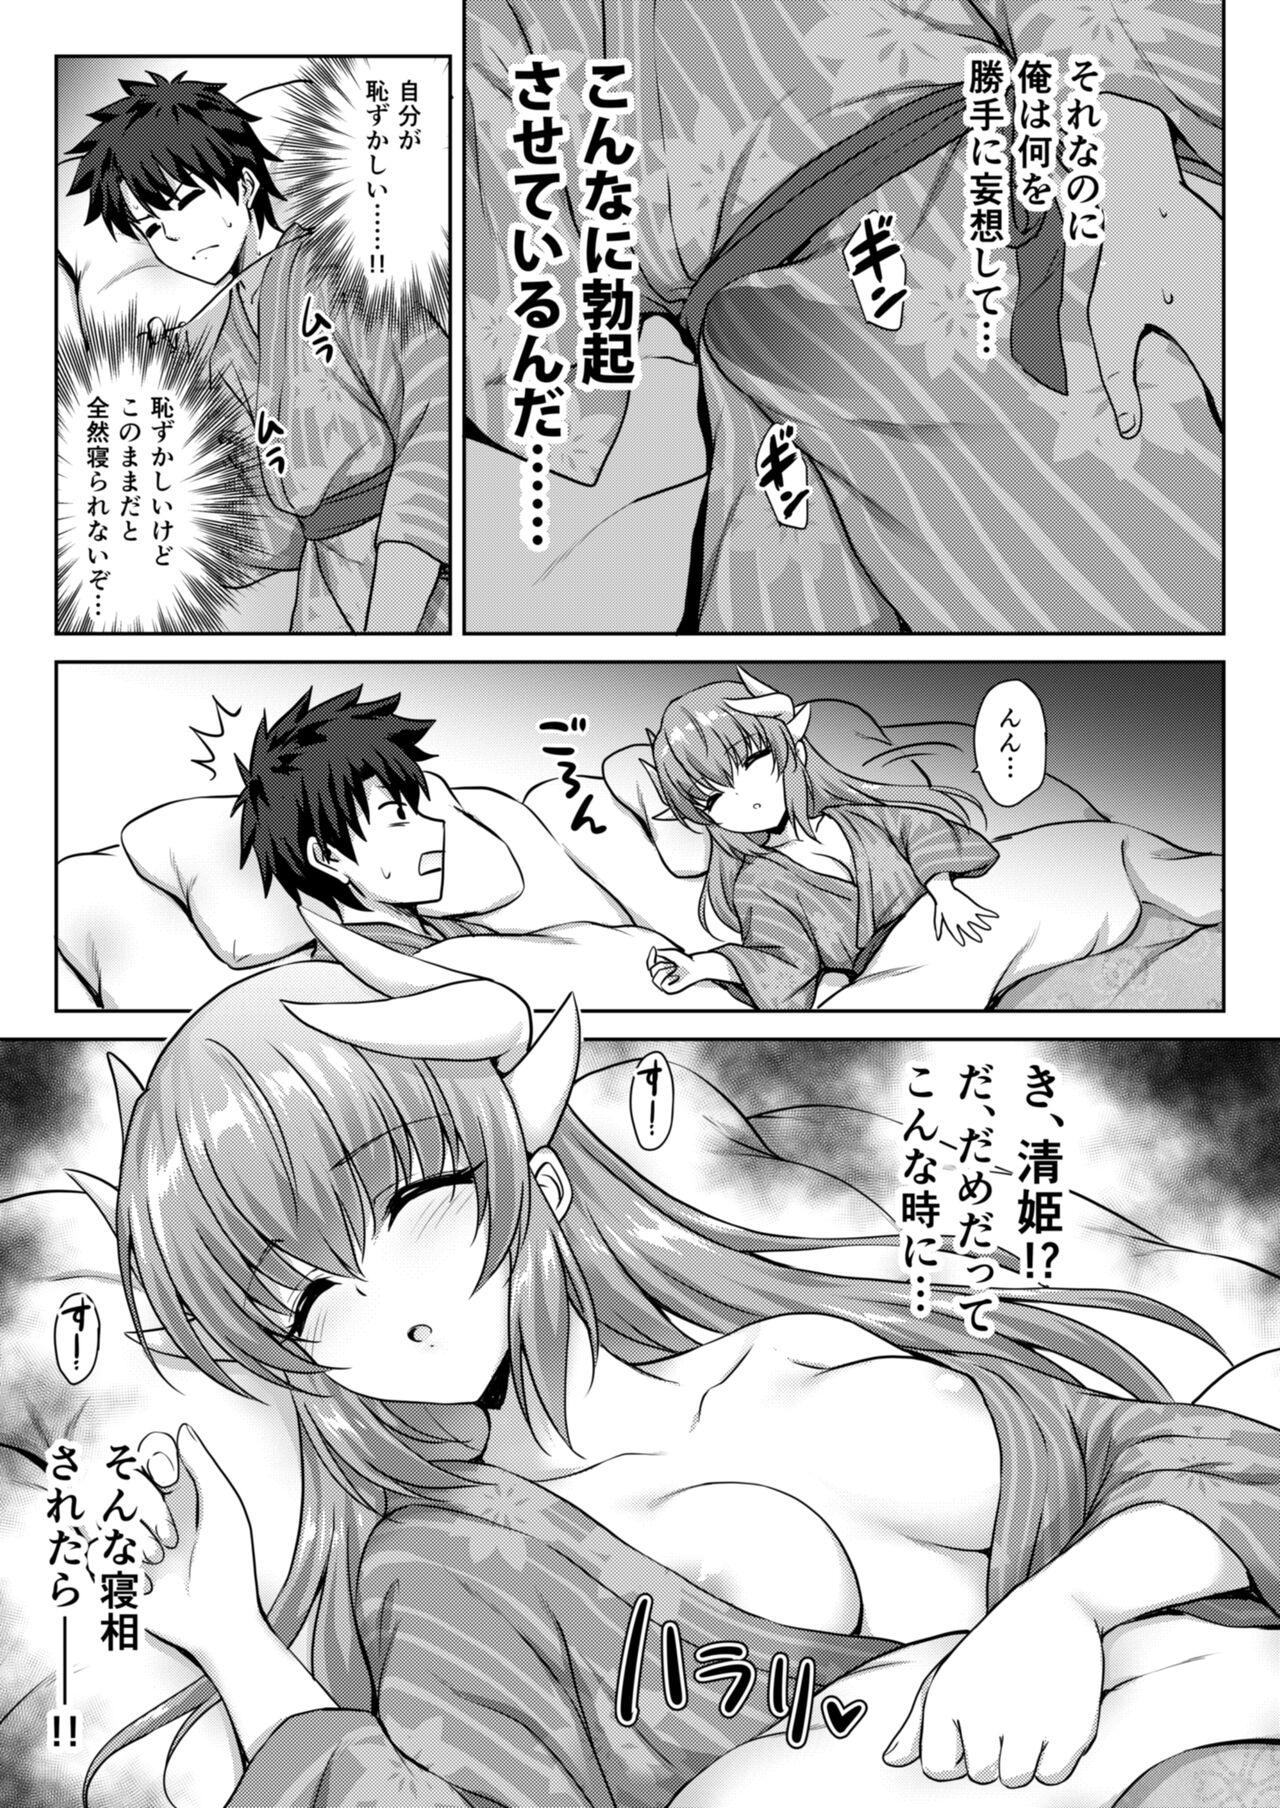 Women Kiyohime Onsen - Fate grand order Roludo - Page 4